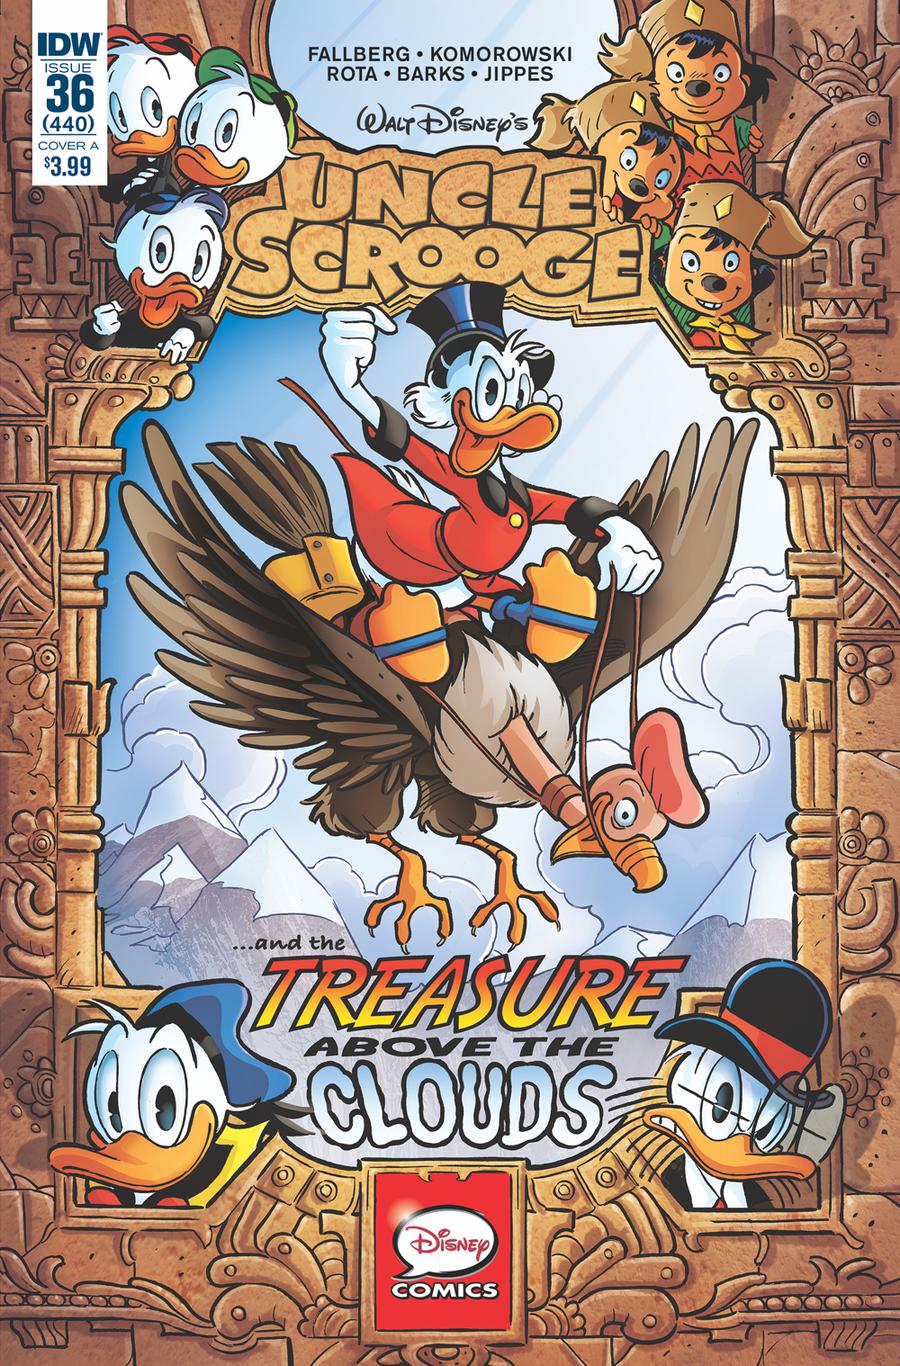 Walt Disneys Uncle Scrooge And The Treasure Above The Clouds TP